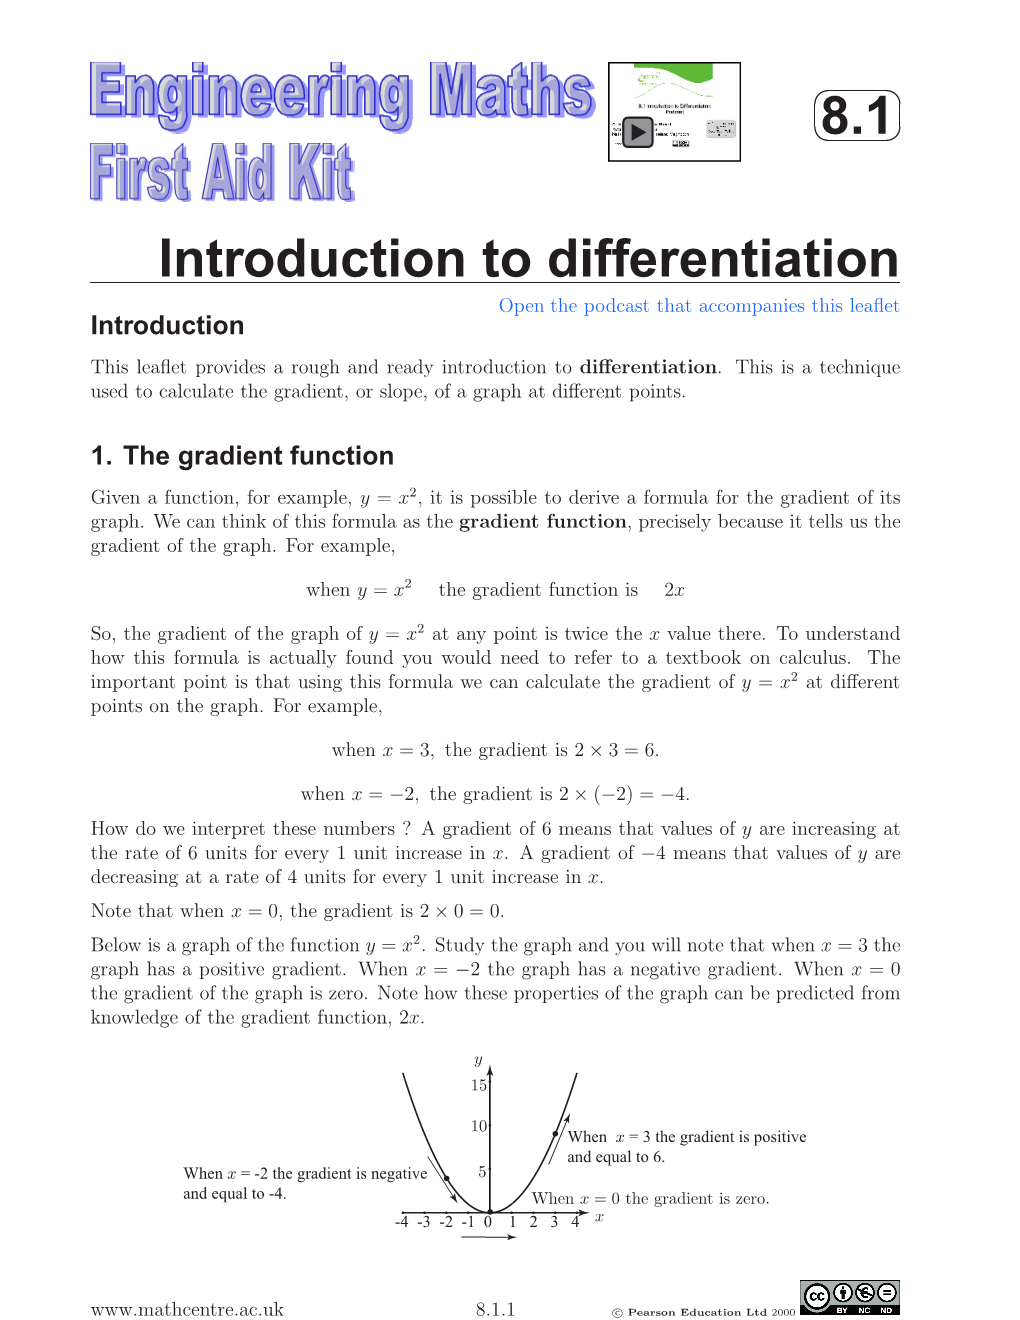 Introduction to Differentiation Open the Podcast That Accompanies This Leaﬂet Introduction This Leaﬂet Provides a Rough and Ready Introduction to Diﬀerentiation